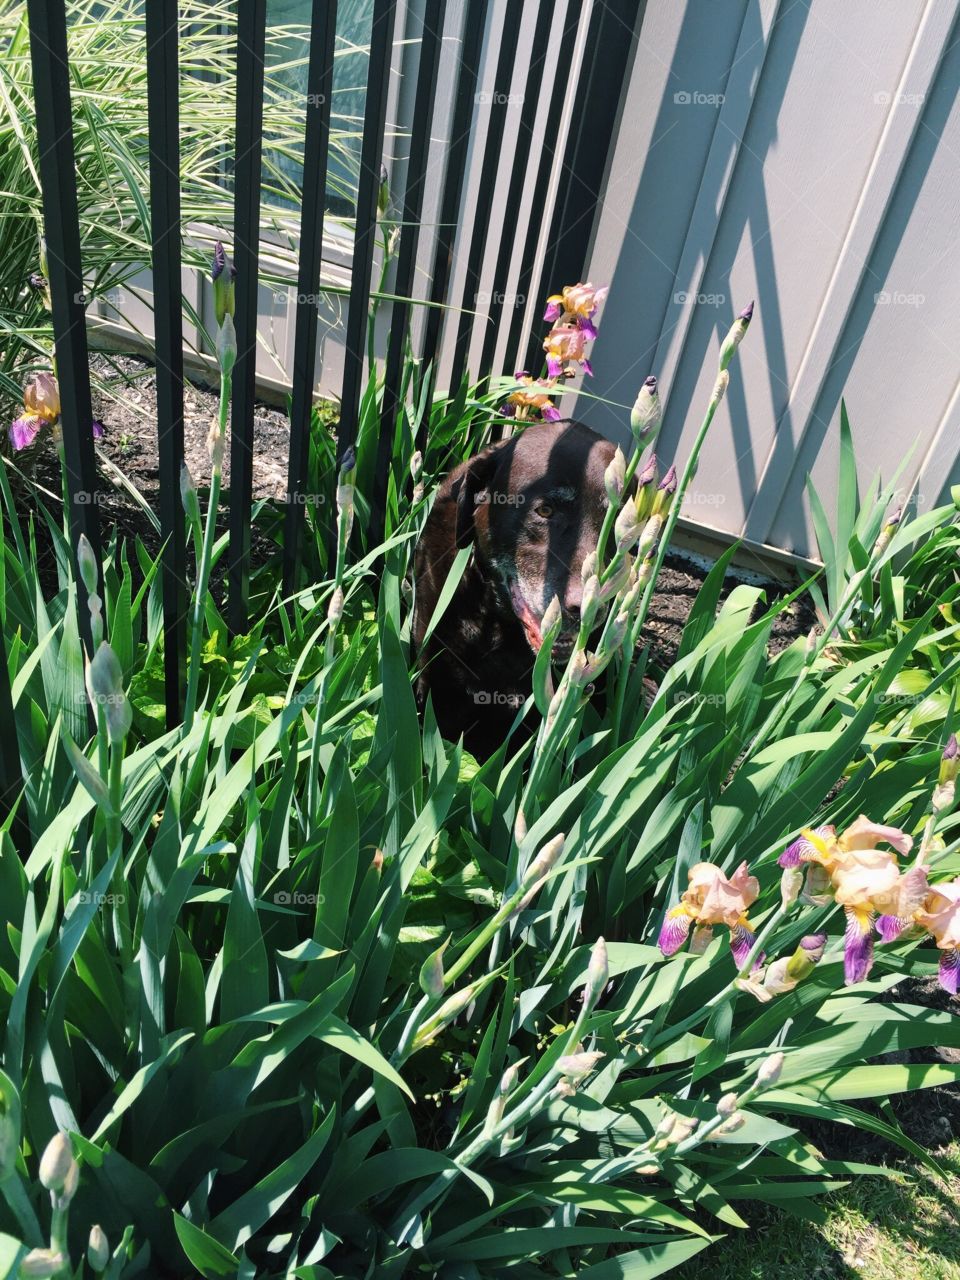 Dog in the flowers